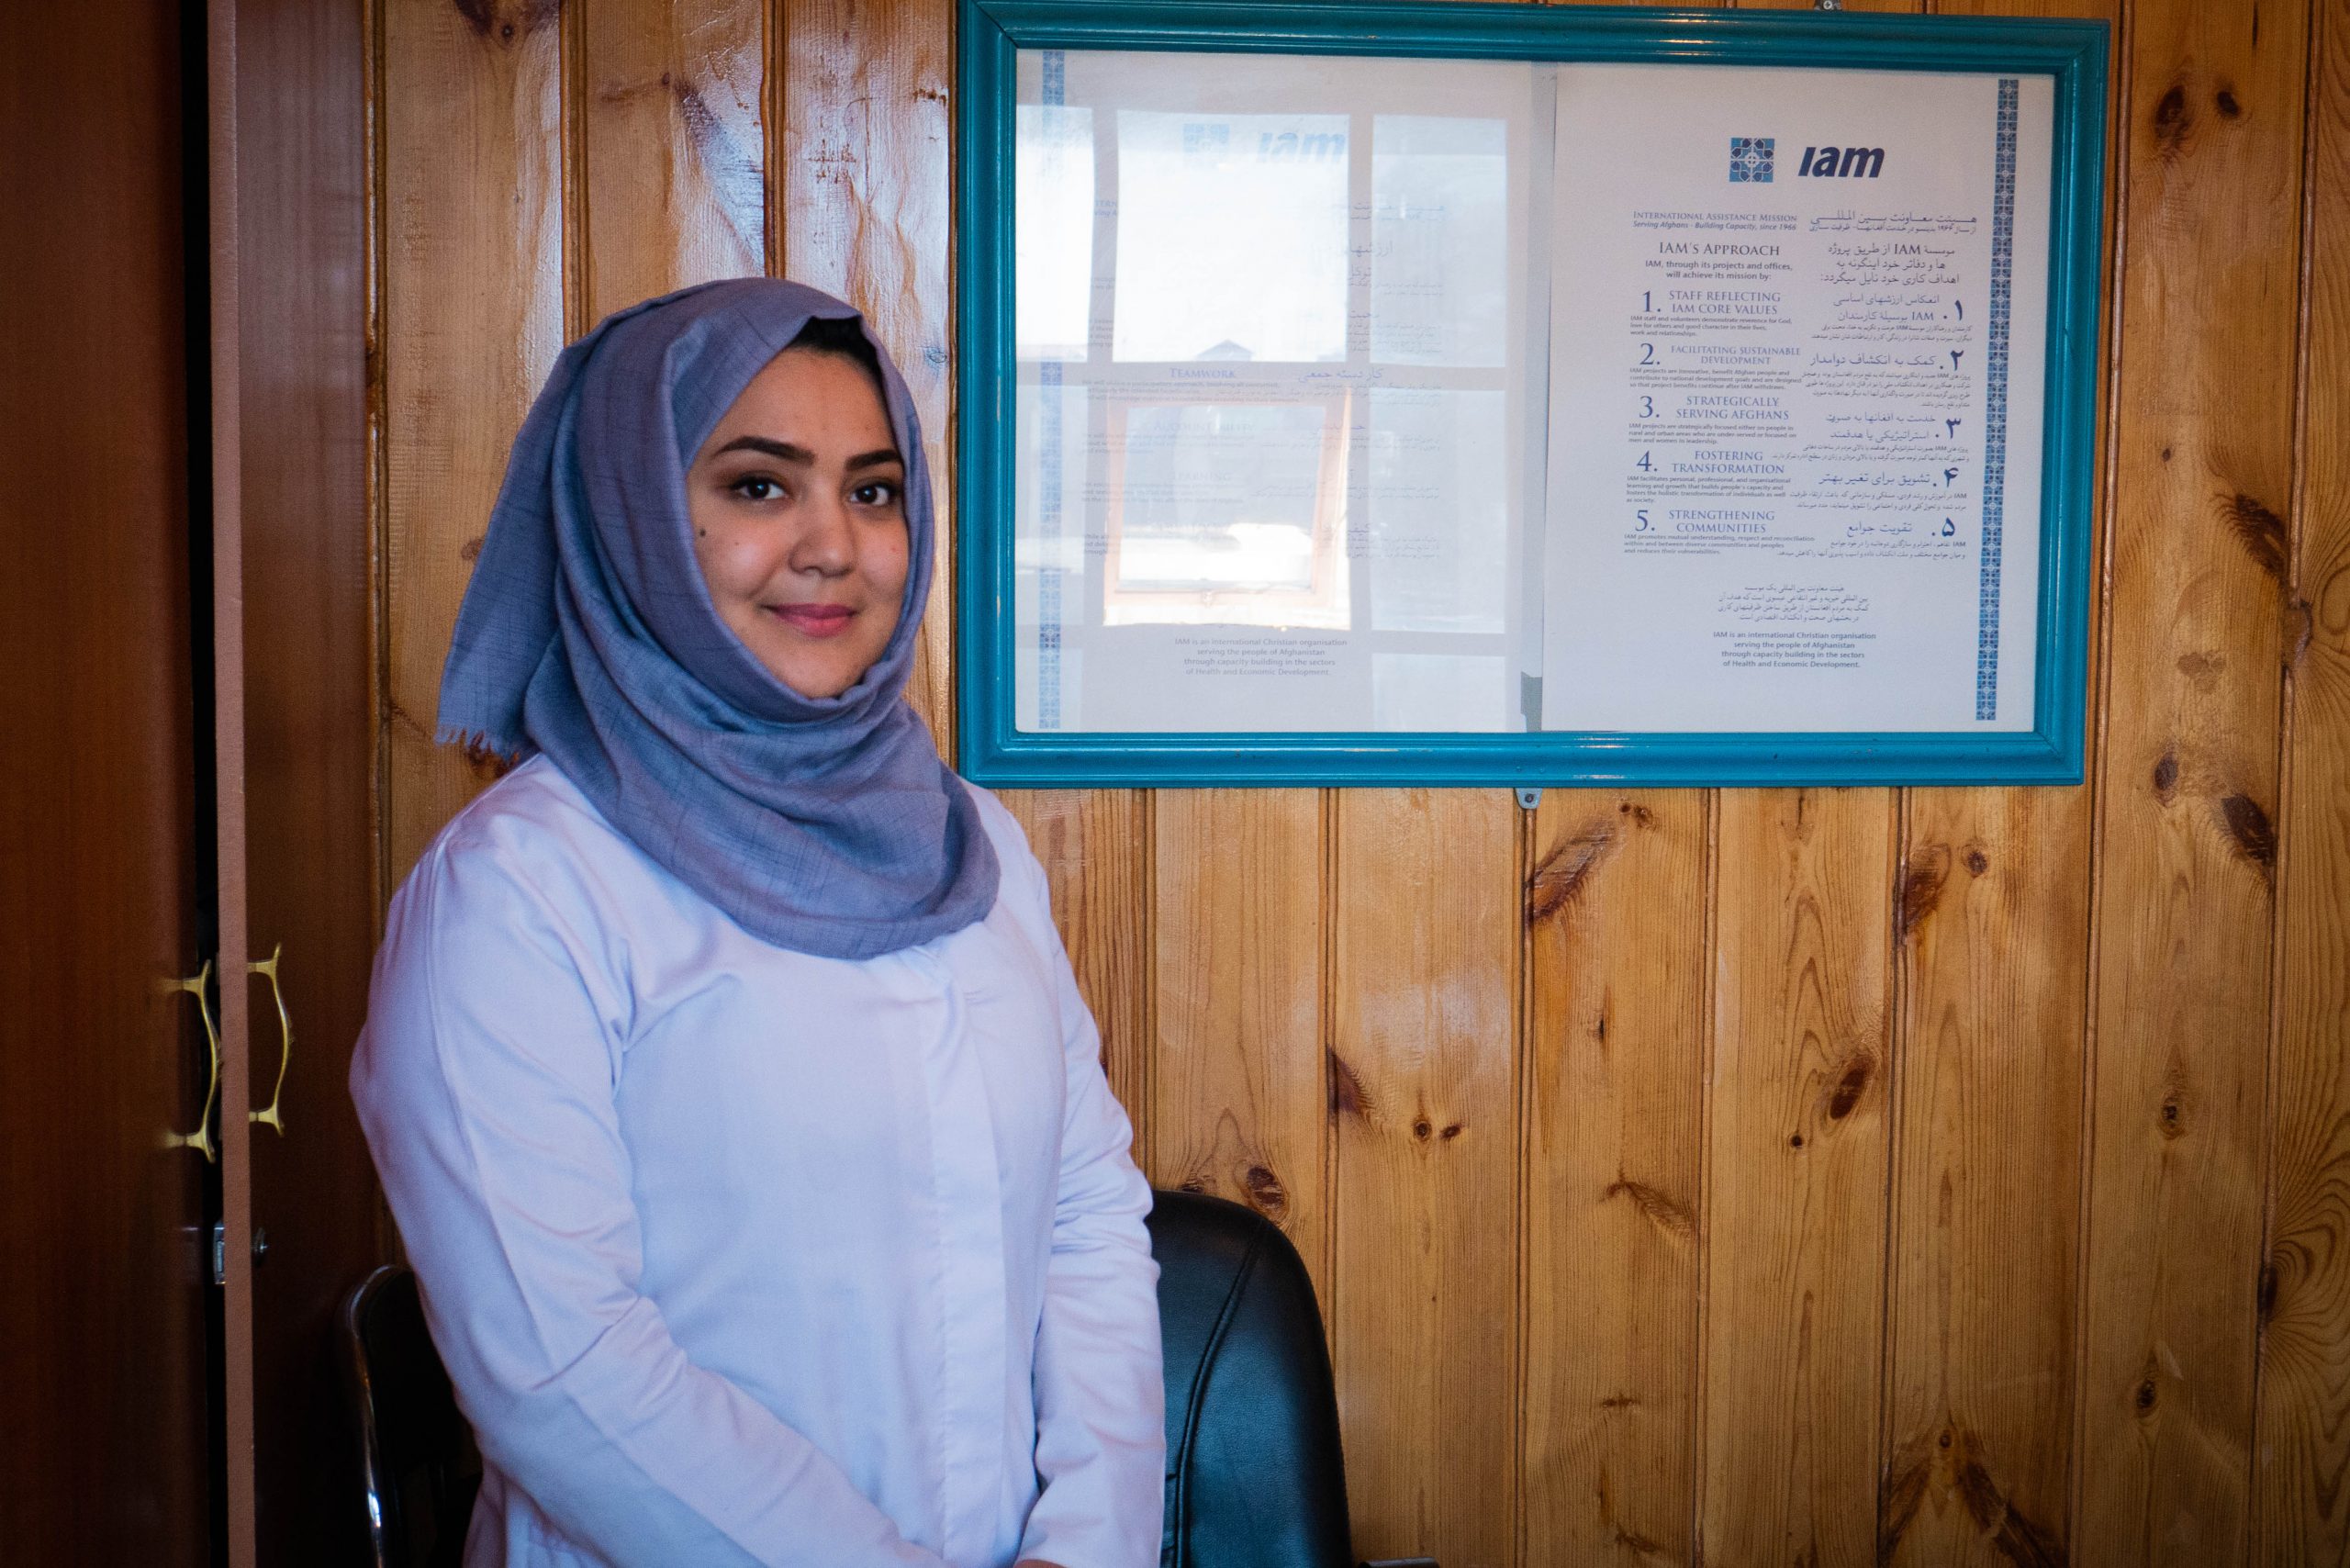 Nahida sees 40 patients – although some days it can be as many as 60.